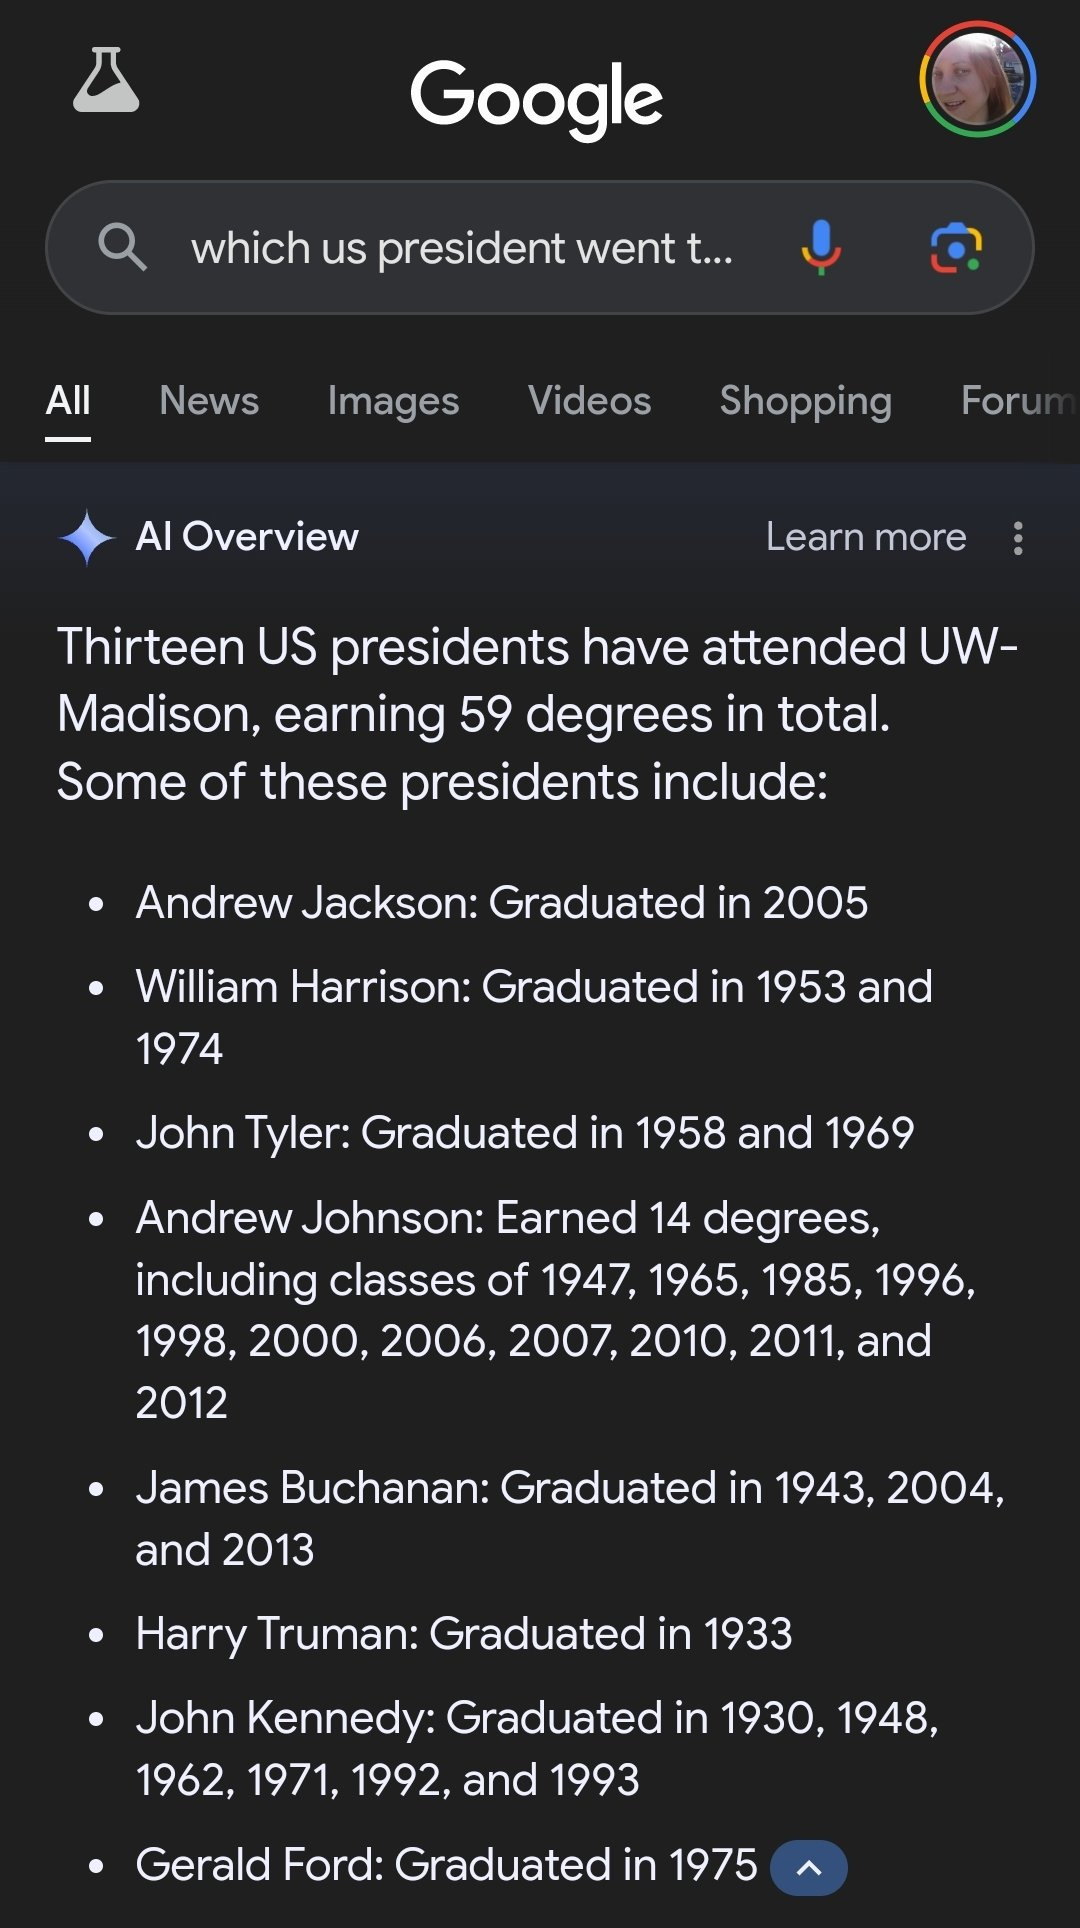 ﻿
Google
Qwhich us president went t...
All News Images Videos
Shopping Forum
Al Overview
Learn more
Thirteen US presidents have attended UW- Madison, earning 59 degrees in total. Some of these presidents include:
• Andrew Jackson: Graduated in 2005
• William Harrison: Graduated in 1953 and 1974
• John Tyler: Graduated in 1958 and 1969 • Andrew Johnson: Earned 14 degrees, including classes of 1947, 1965, 1985, 1996, 1998, 2000, 2006, 2007, 2010, 2011, and 2012
James Buchanan: Graduated in 1943, 2004, and 2013
Harry Truman: Graduated in 1933
• John Kennedy: Graduated in 1930, 1948, 1962, 1971, 1992, and 1993
• Gerald Ford: Graduated in 1975 ^